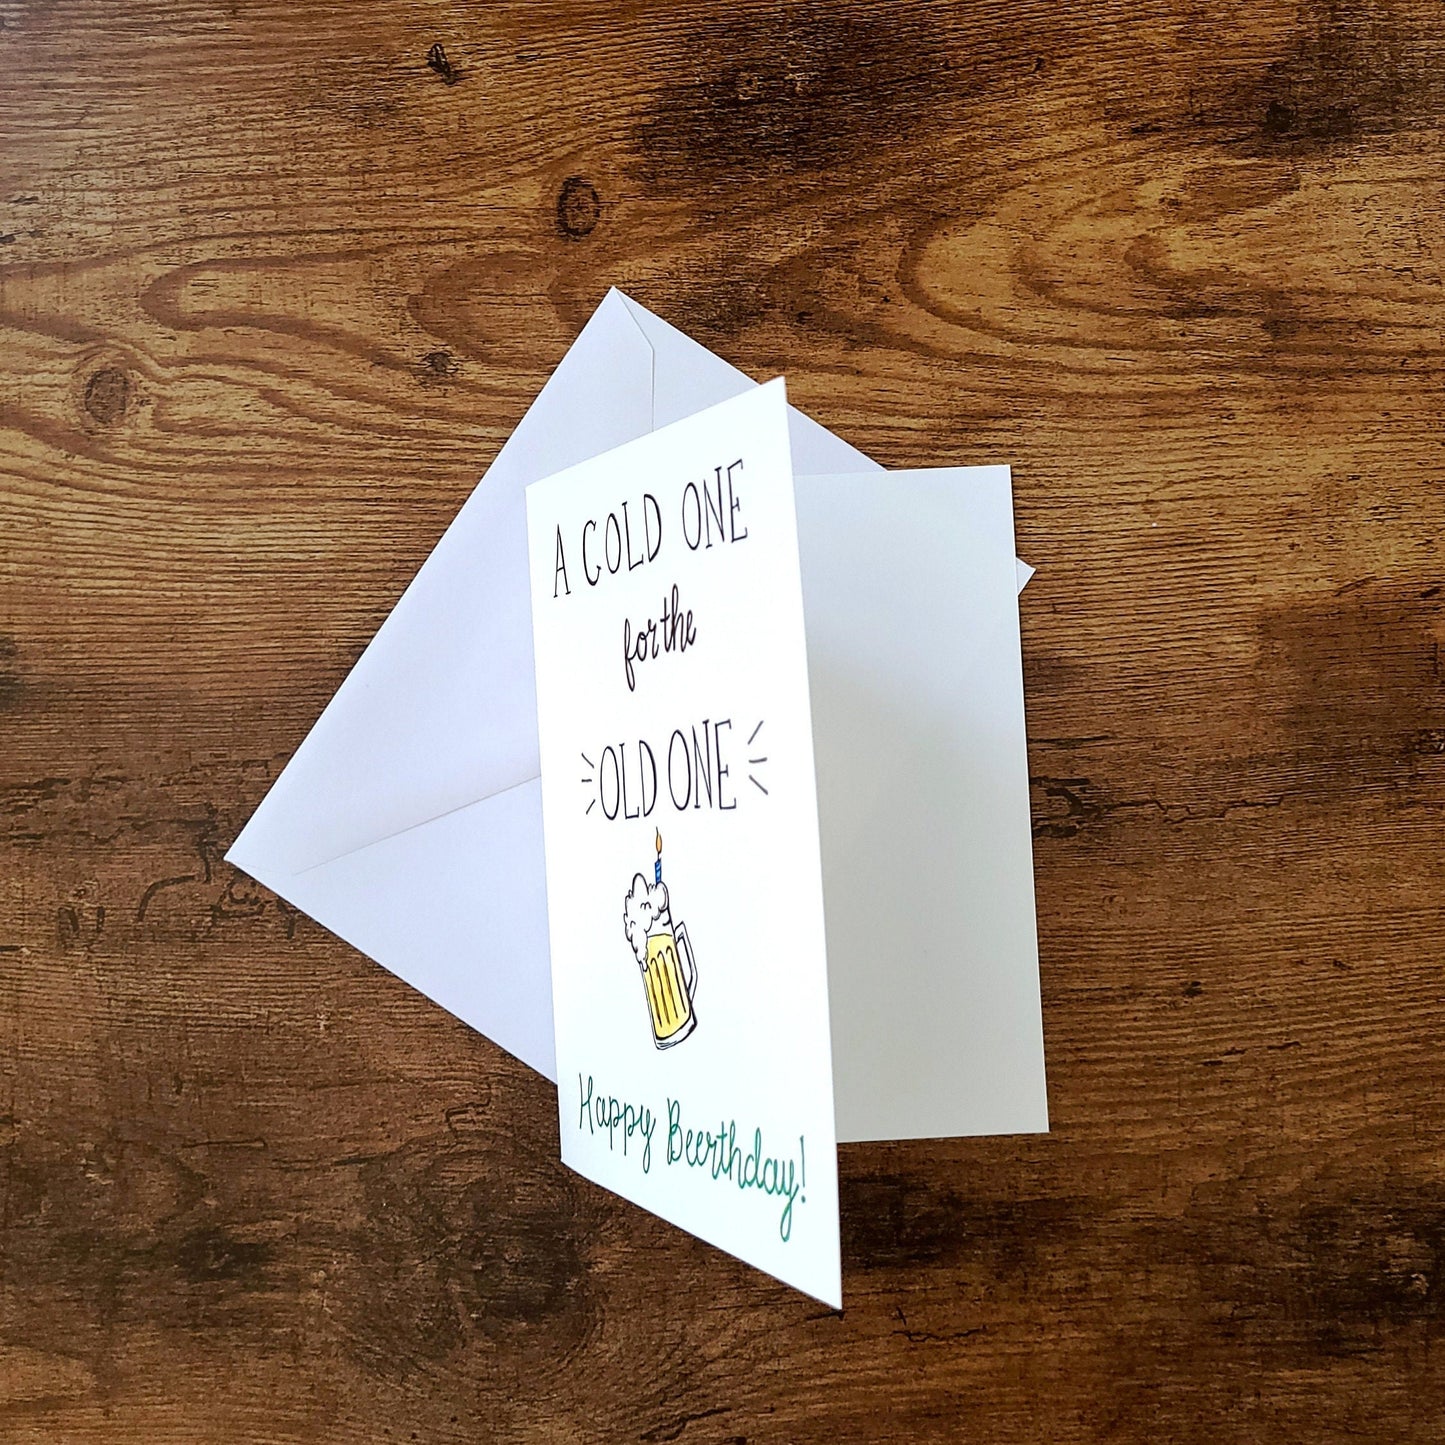 A cold one for the old one, Happy Beerthday Card, Beer lover, Birthday Card for him, Beer card, Food puns, Dad Birthday Card, Funny Dad Joke